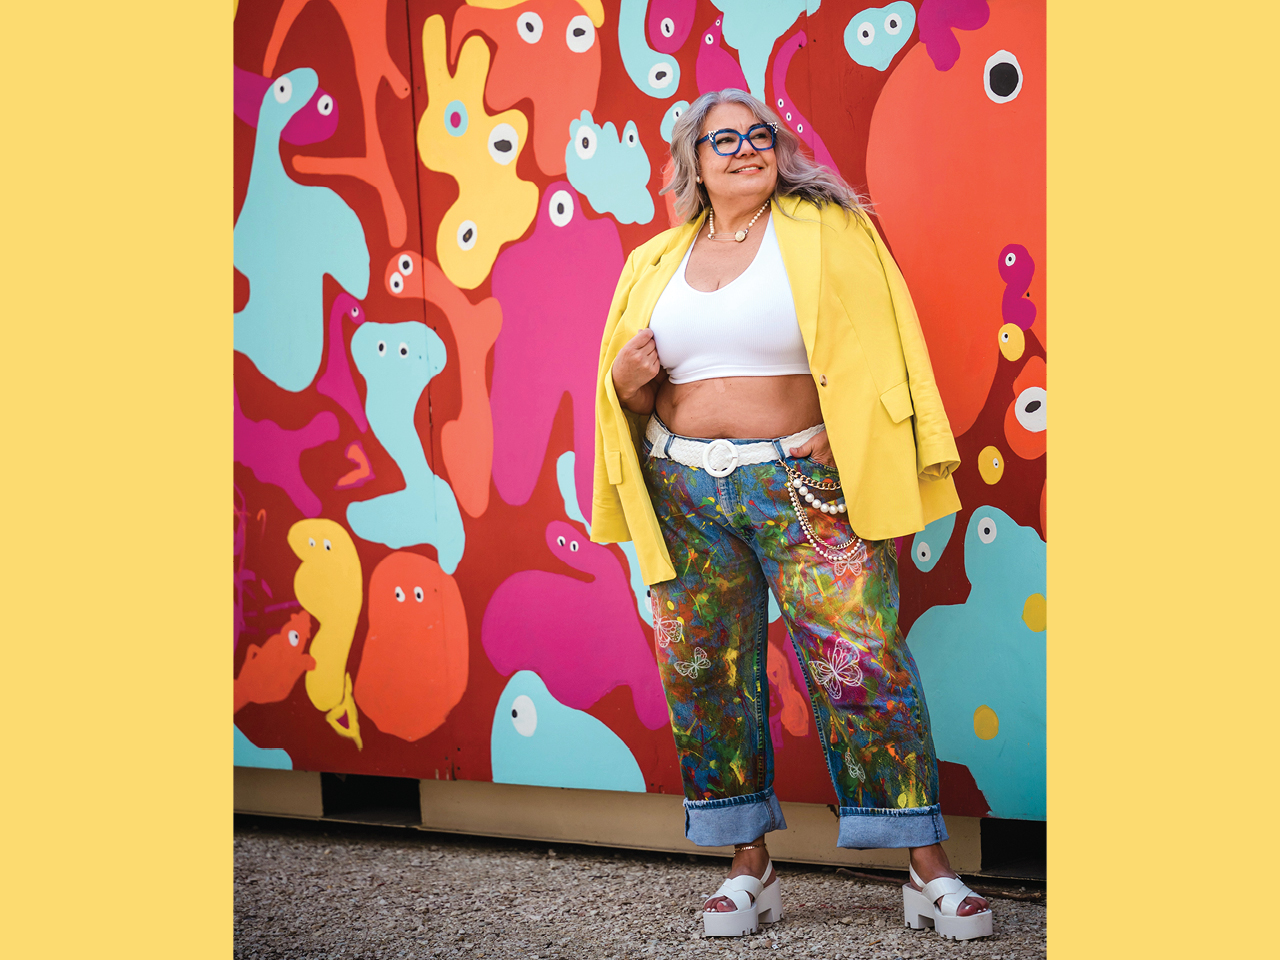 Influencer Manny Martins-Karma wearing painted jeans and a bright yellow blazer against a colourful mural.